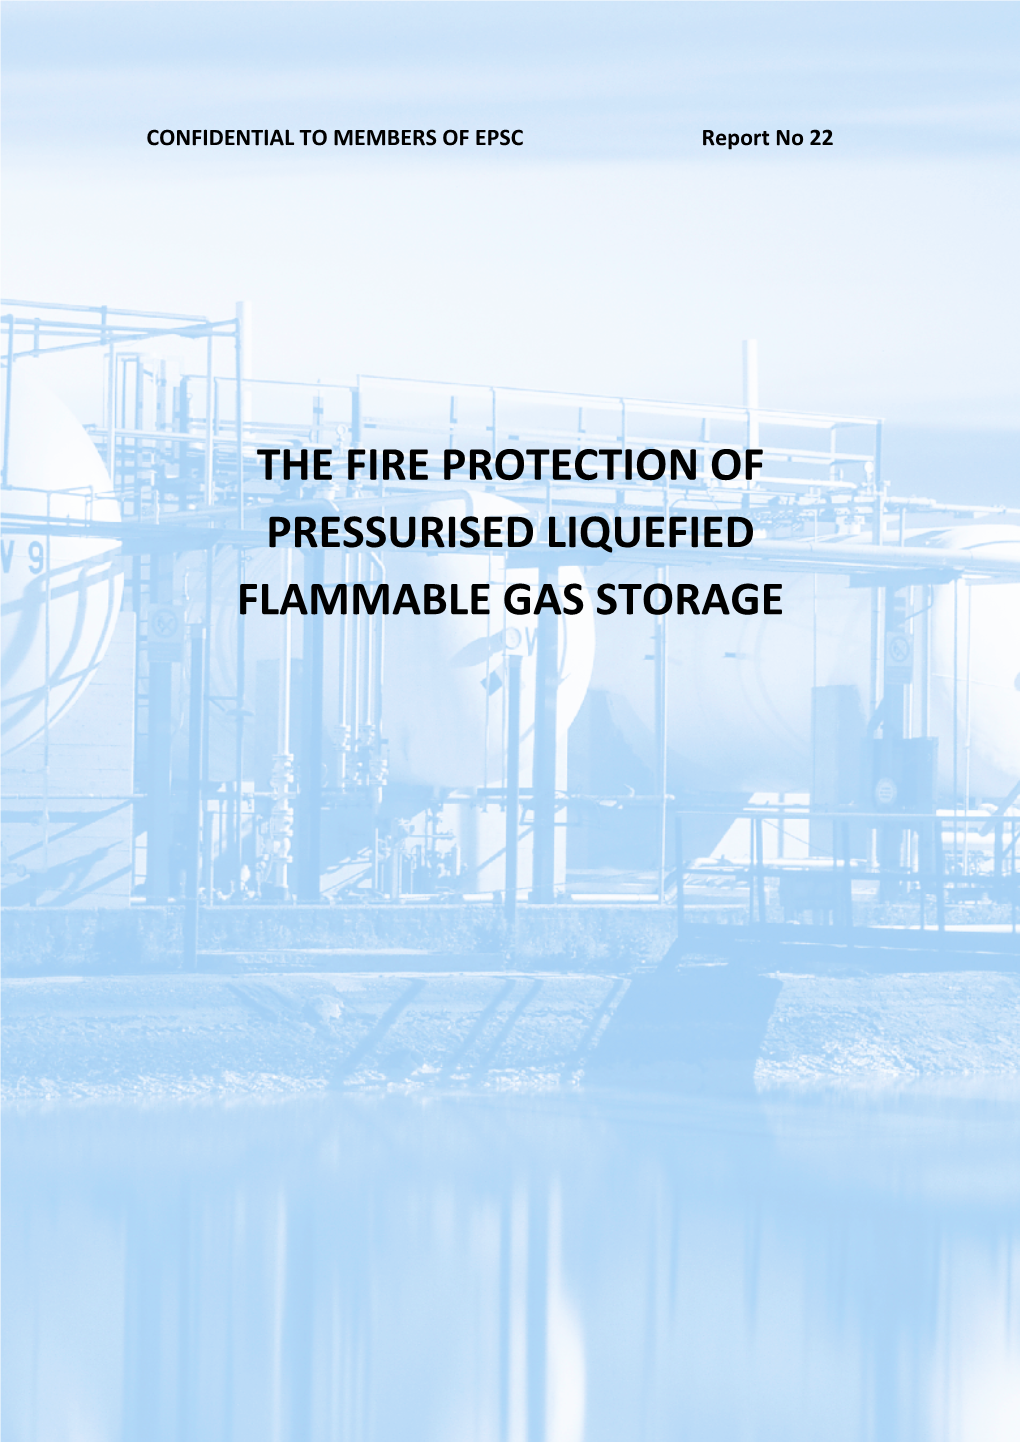 The Fire Protection of Pressurised Liquefied Flammable Gas Storage